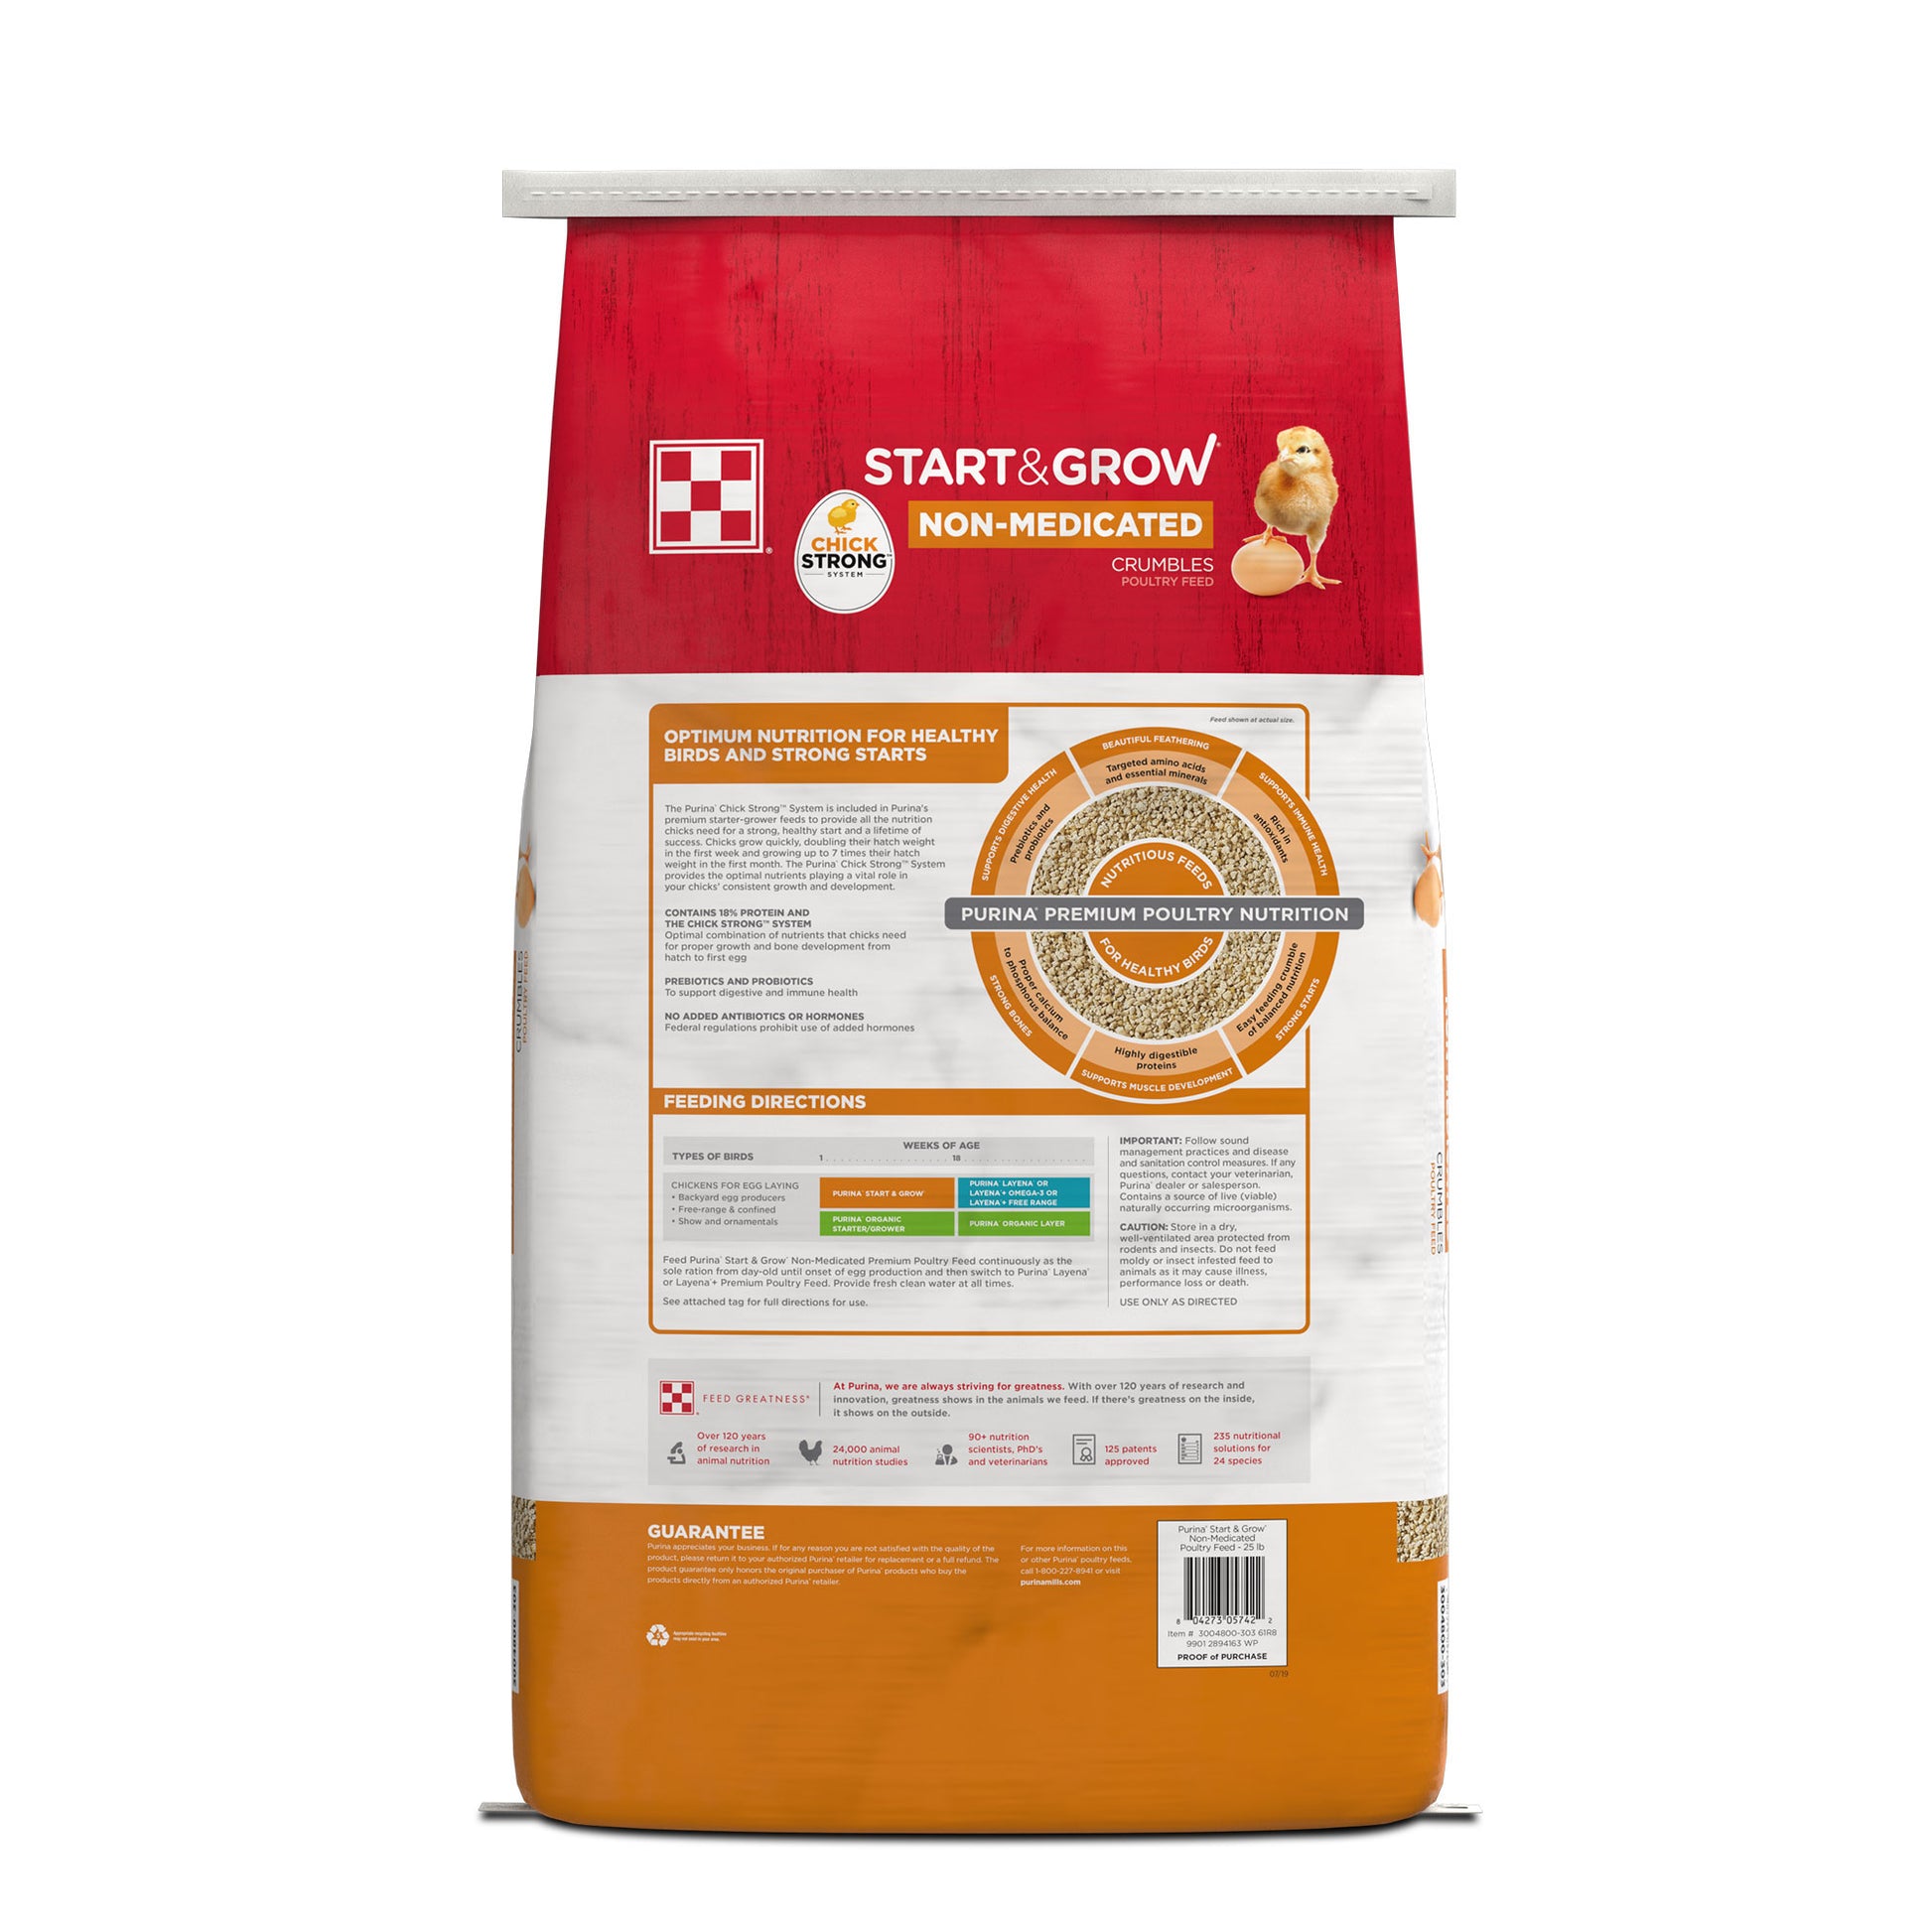 Back of Purina Start & Grow poultry feed 25 Pound bag